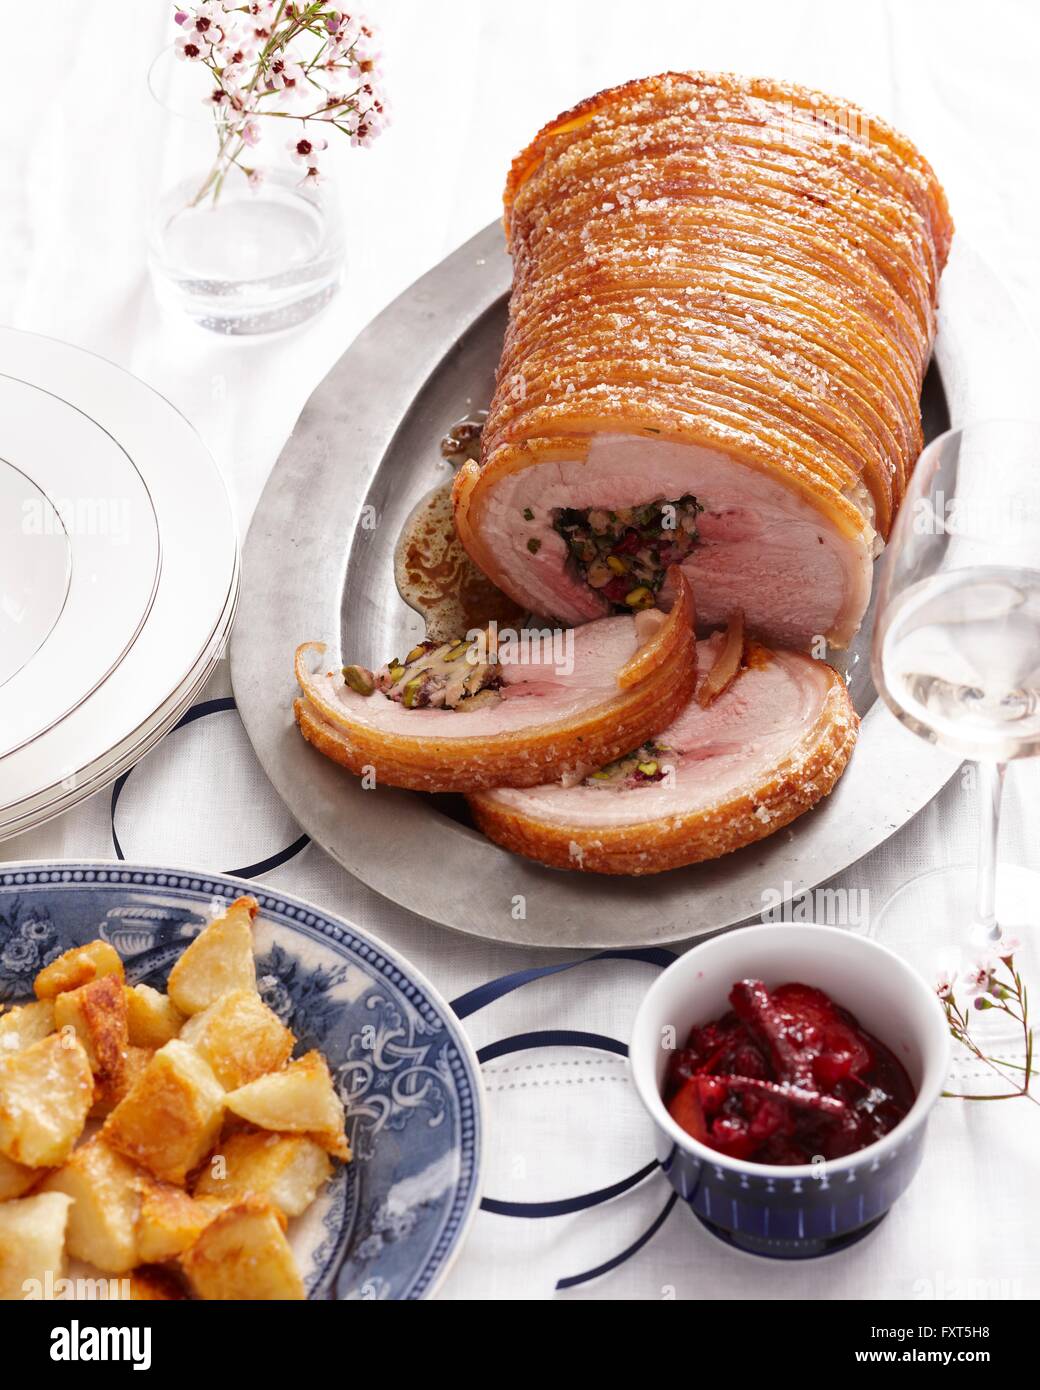 High angle view of stuffed roast pork joint with crispy crackling and roasted potatoes Stock Photo